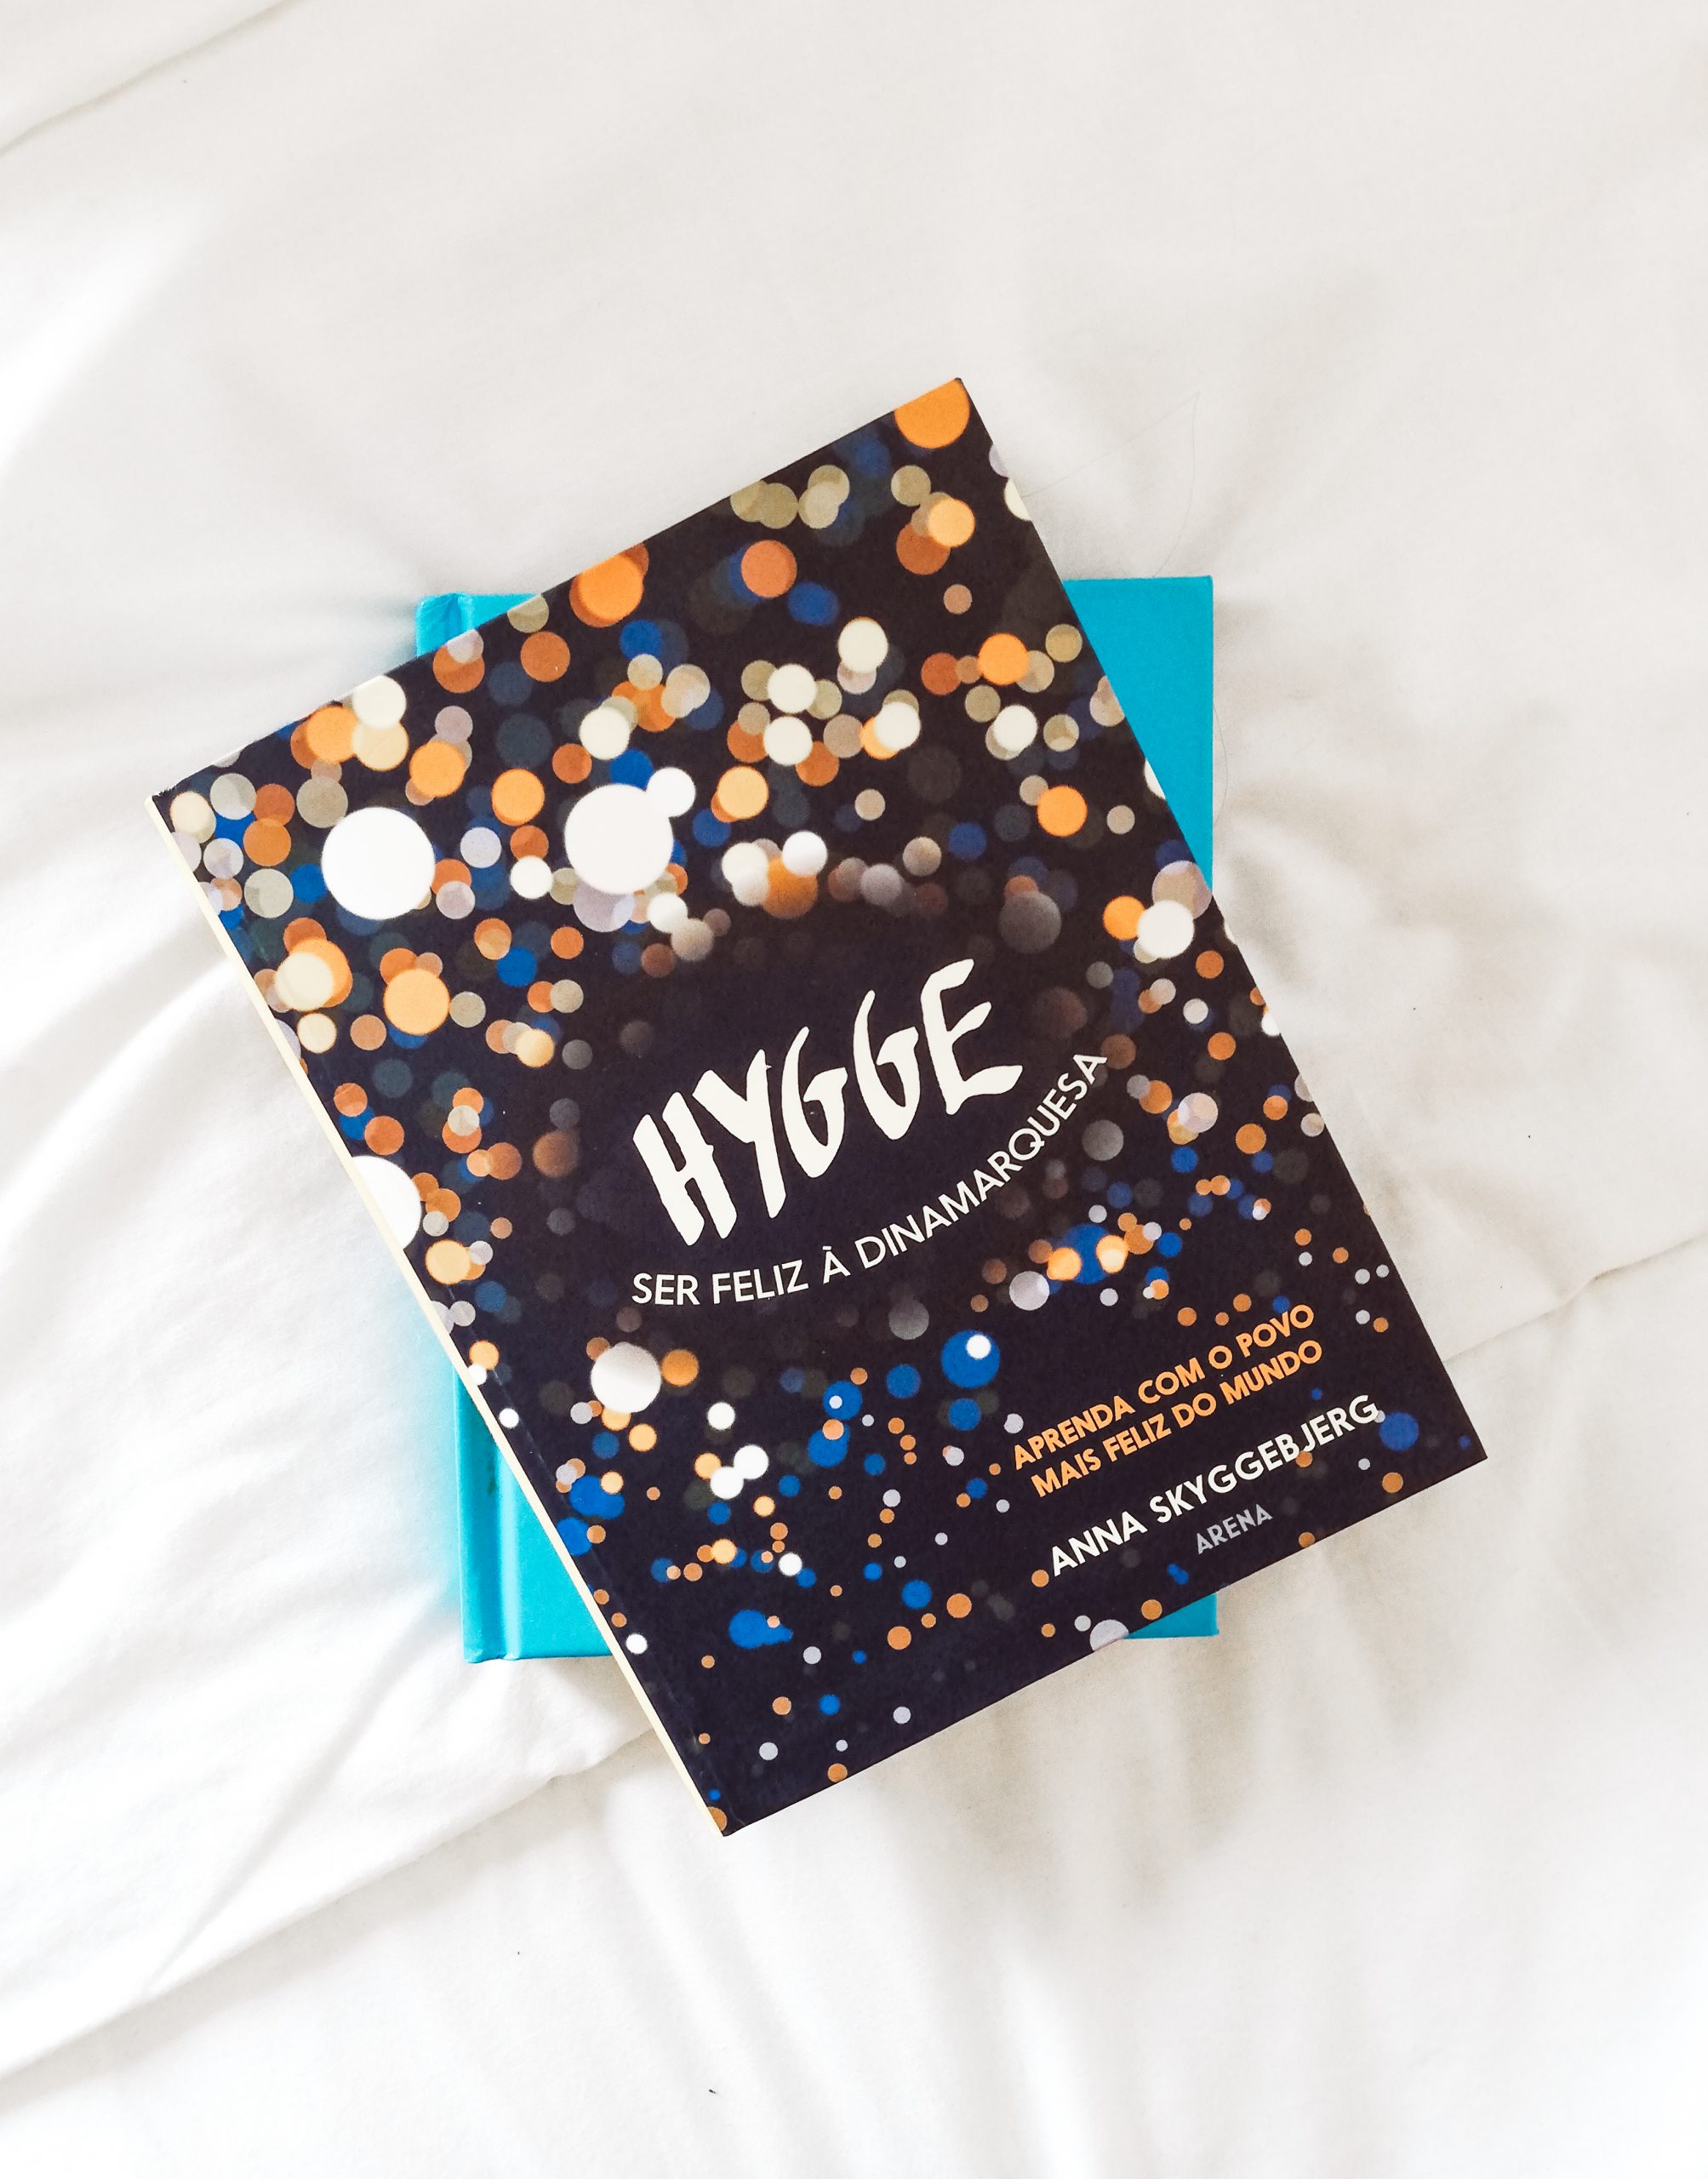 Hygge Lifestyle Meaning